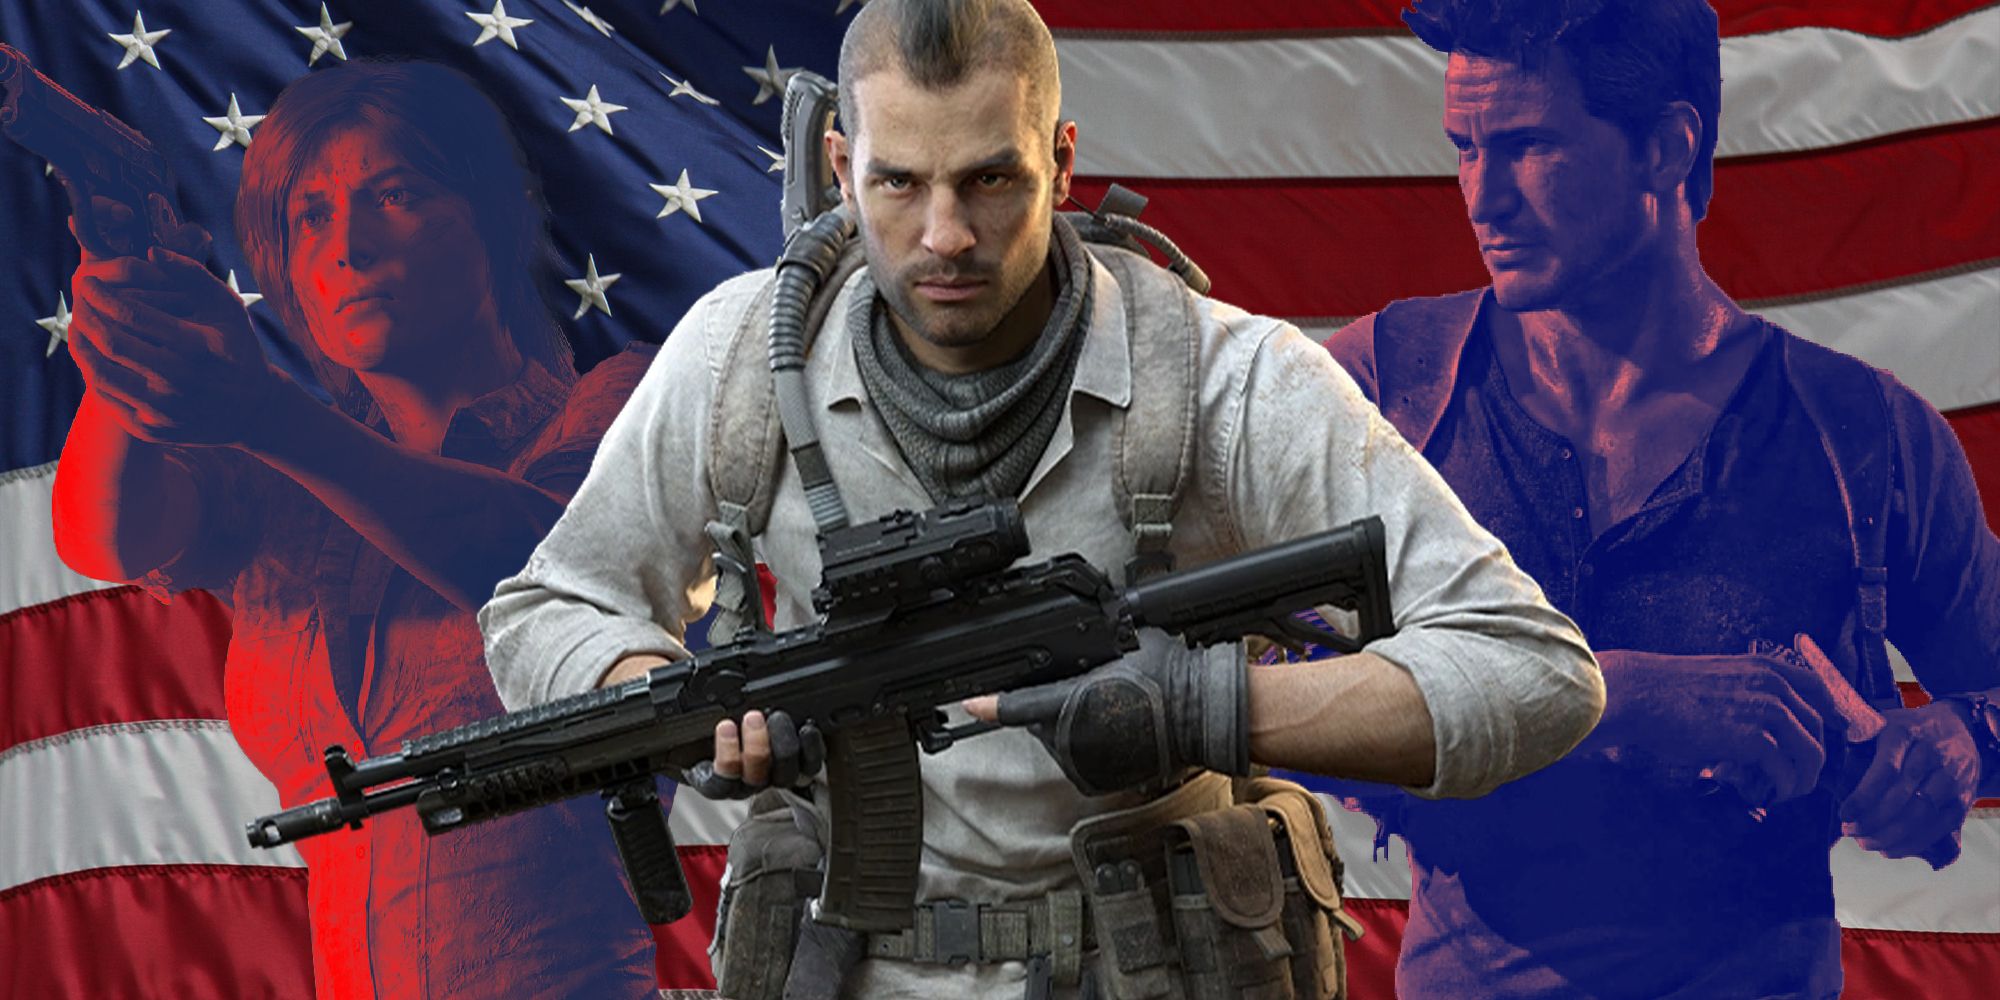 Nathan Drake, Lara Croft, and Call of Duty characters with guns in front of an American flag